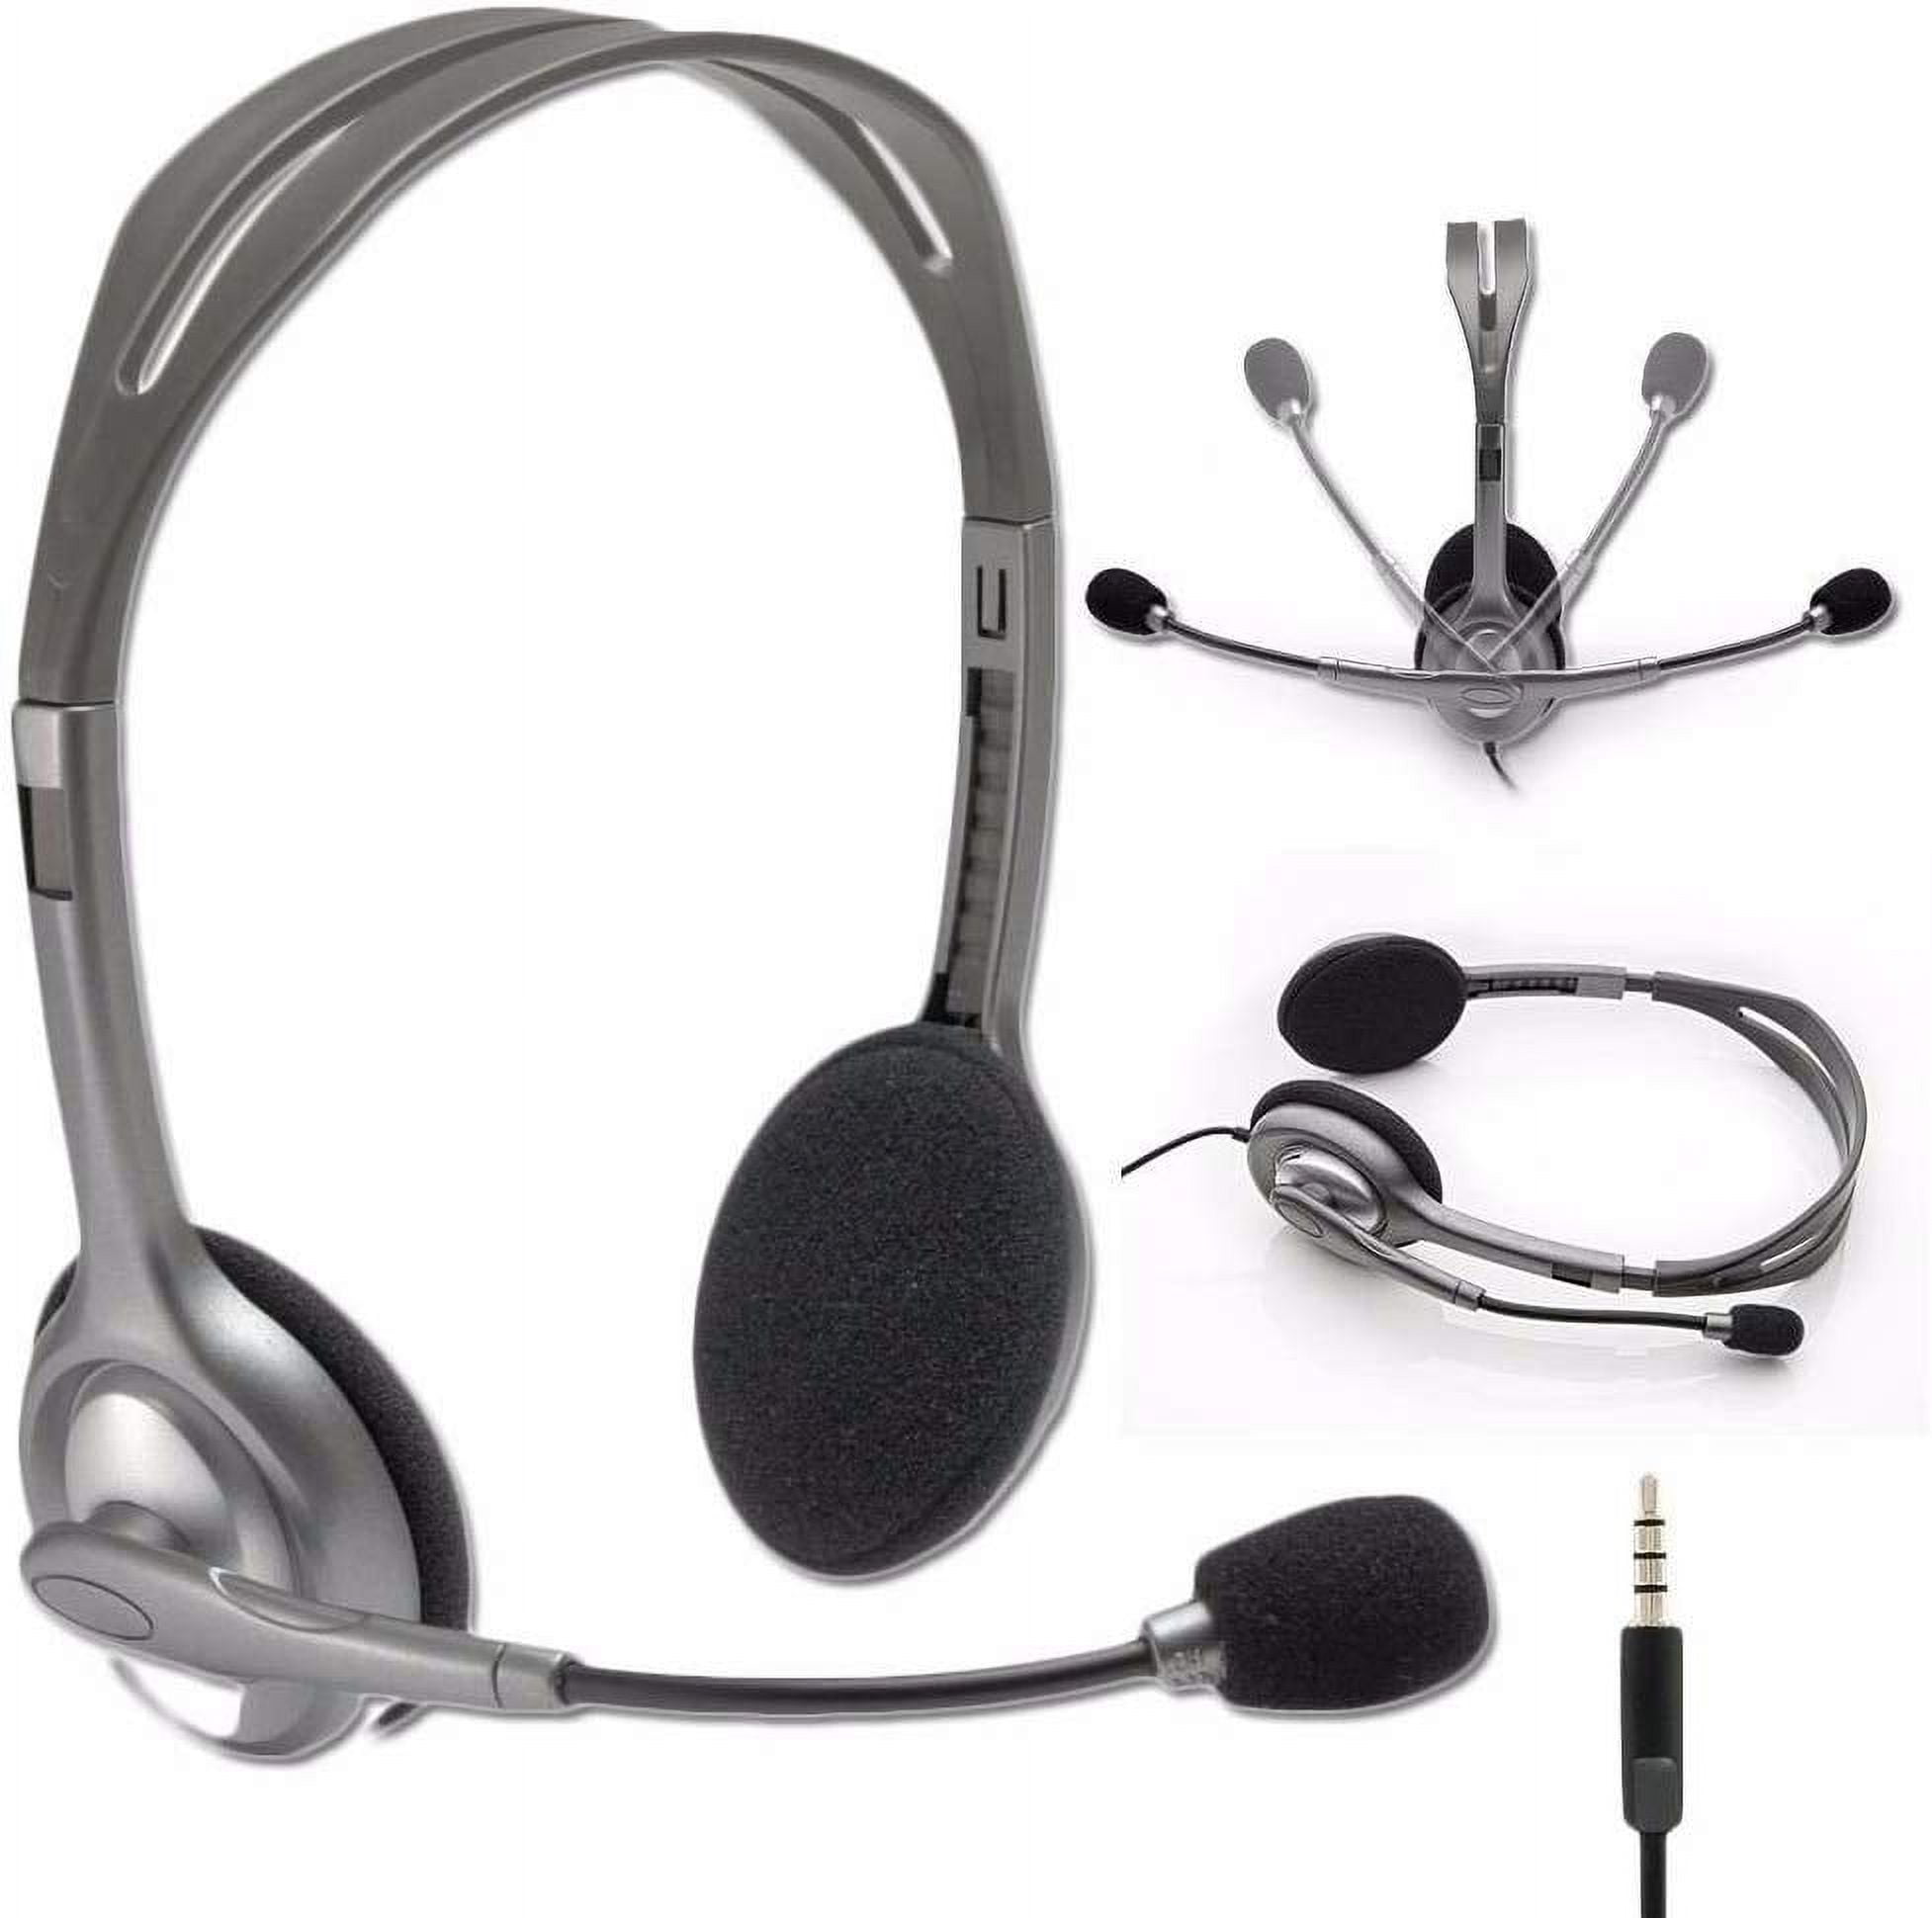 Microphone Stereo Bulk Headset Packaging Cancelling H111/H110 Logitech Noise - with